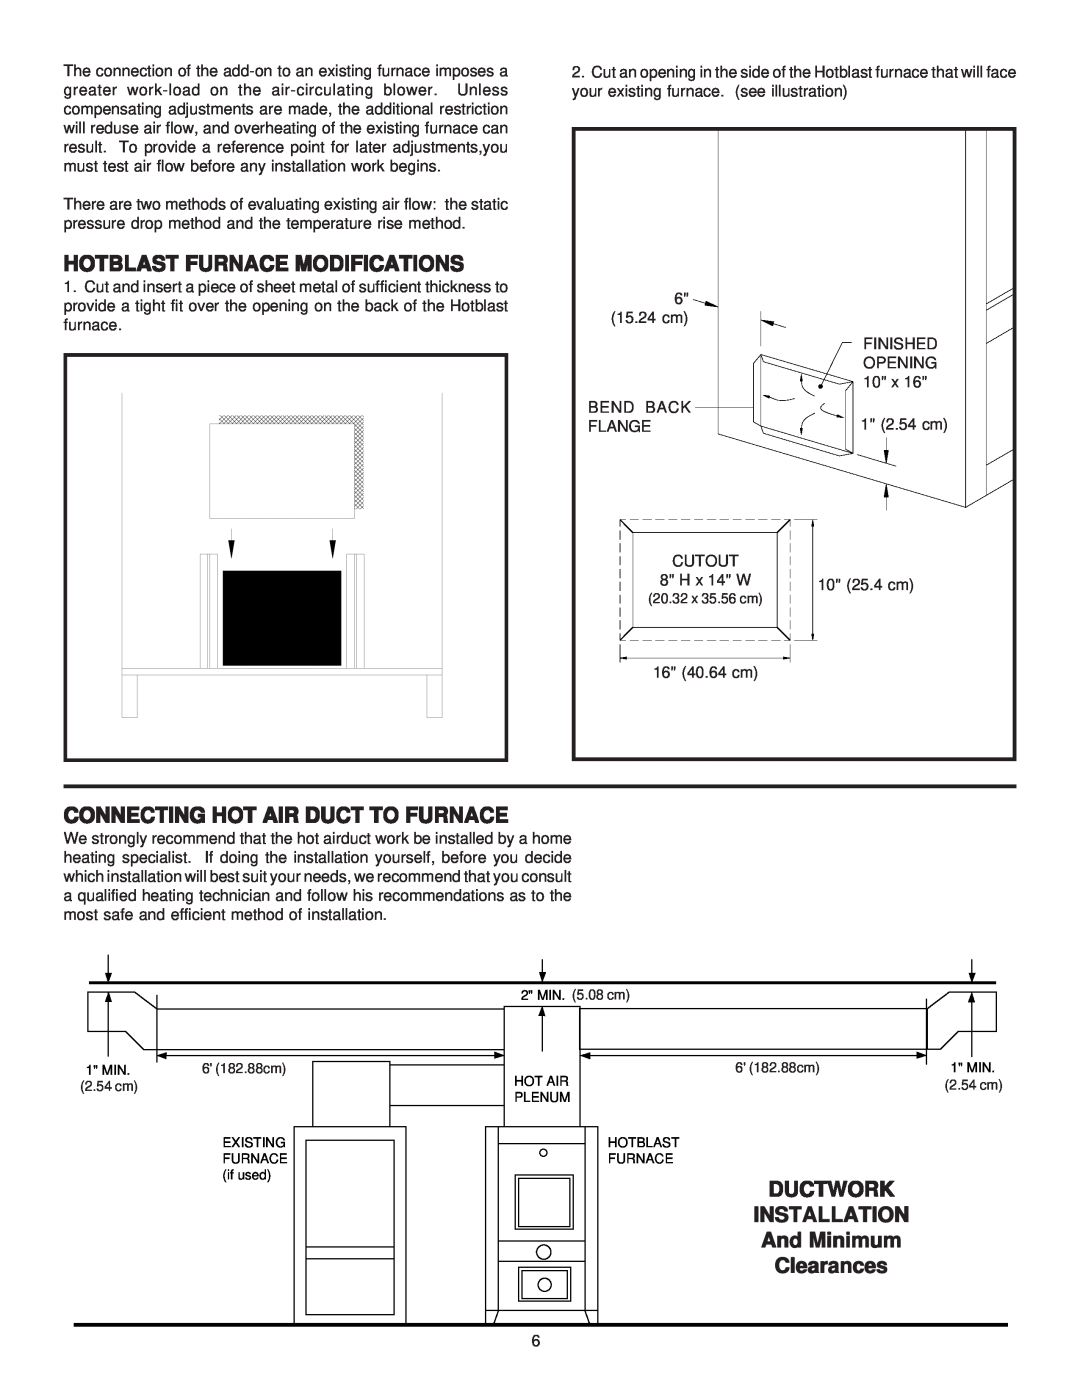 United States Stove 1800GC Hotblast Furnace Modifications, Connecting Hot Air Duct To Furnace, And Minimum, Clearances 